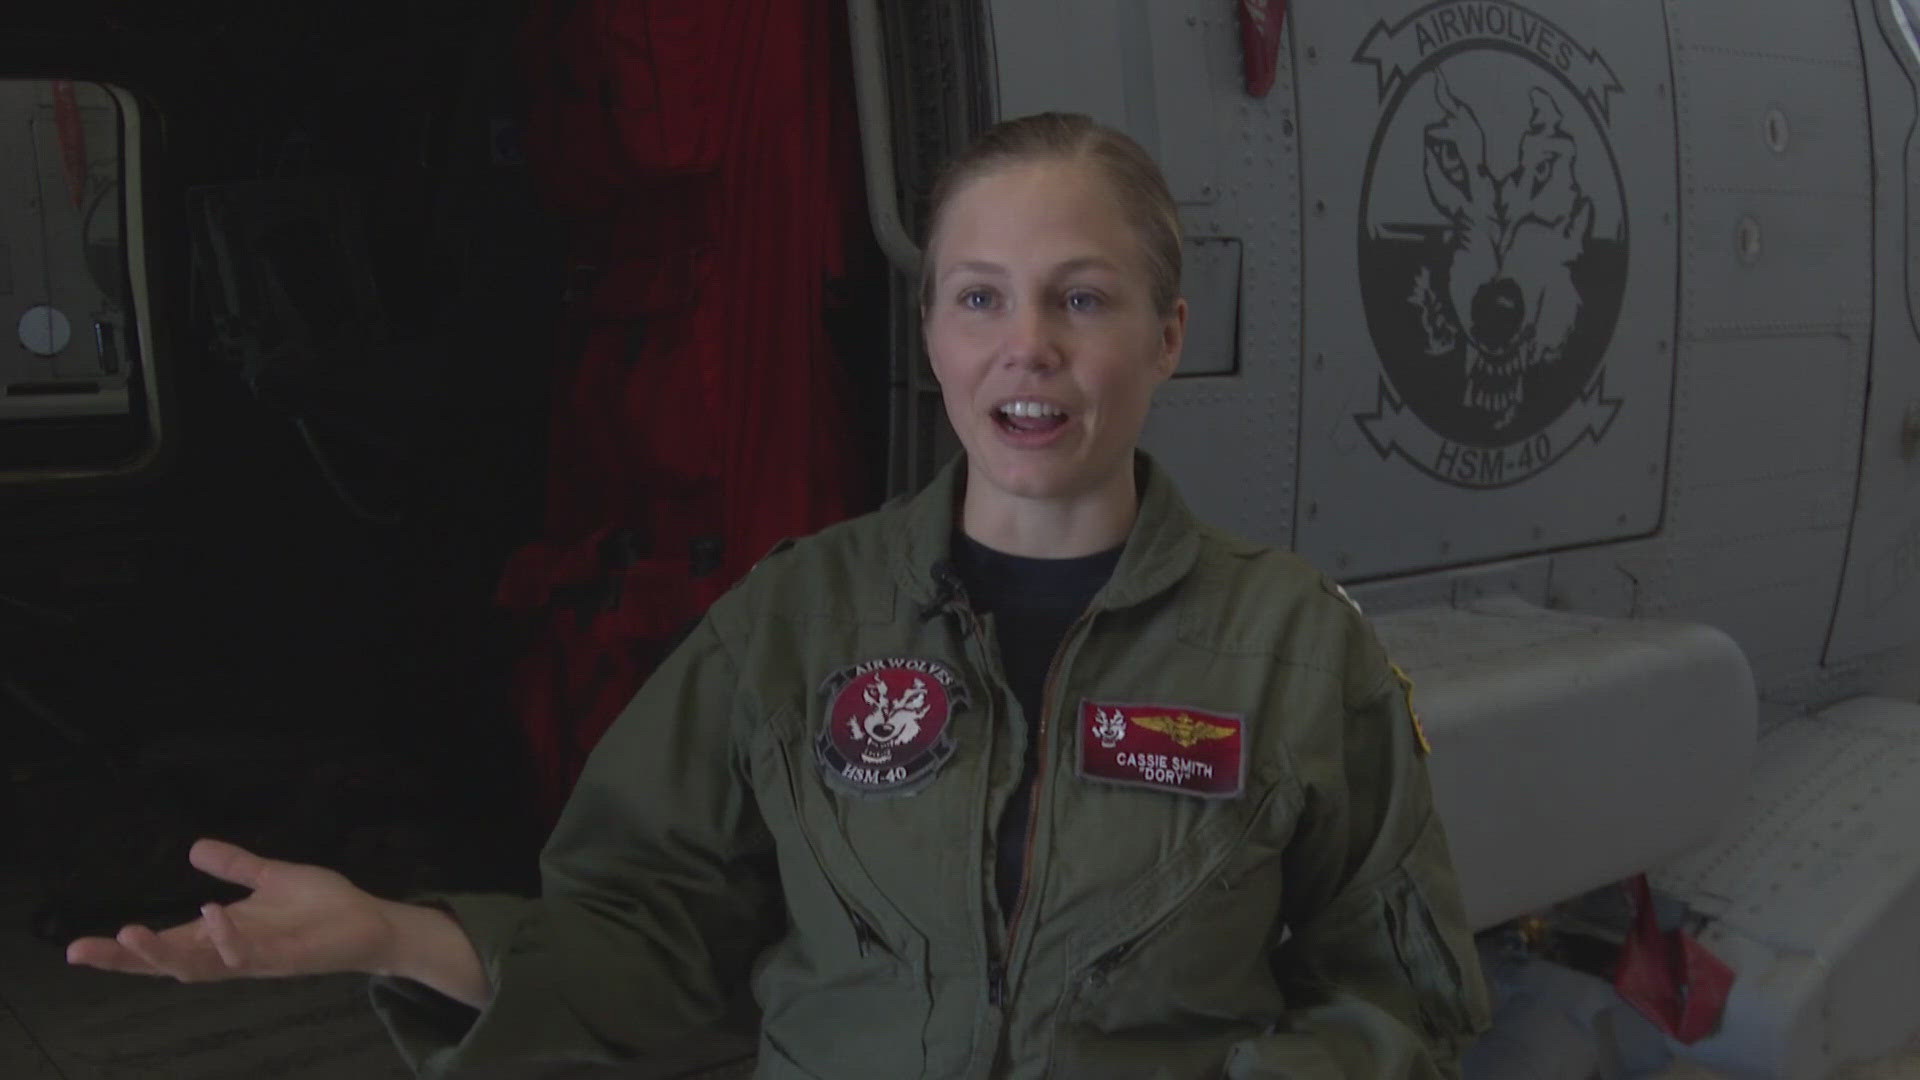 After eight years in the Navy, Lieutenant Cassie "Dory" Smith is now a pilot and instructor. She said her trainees learn how to fly their fleet aircraft.